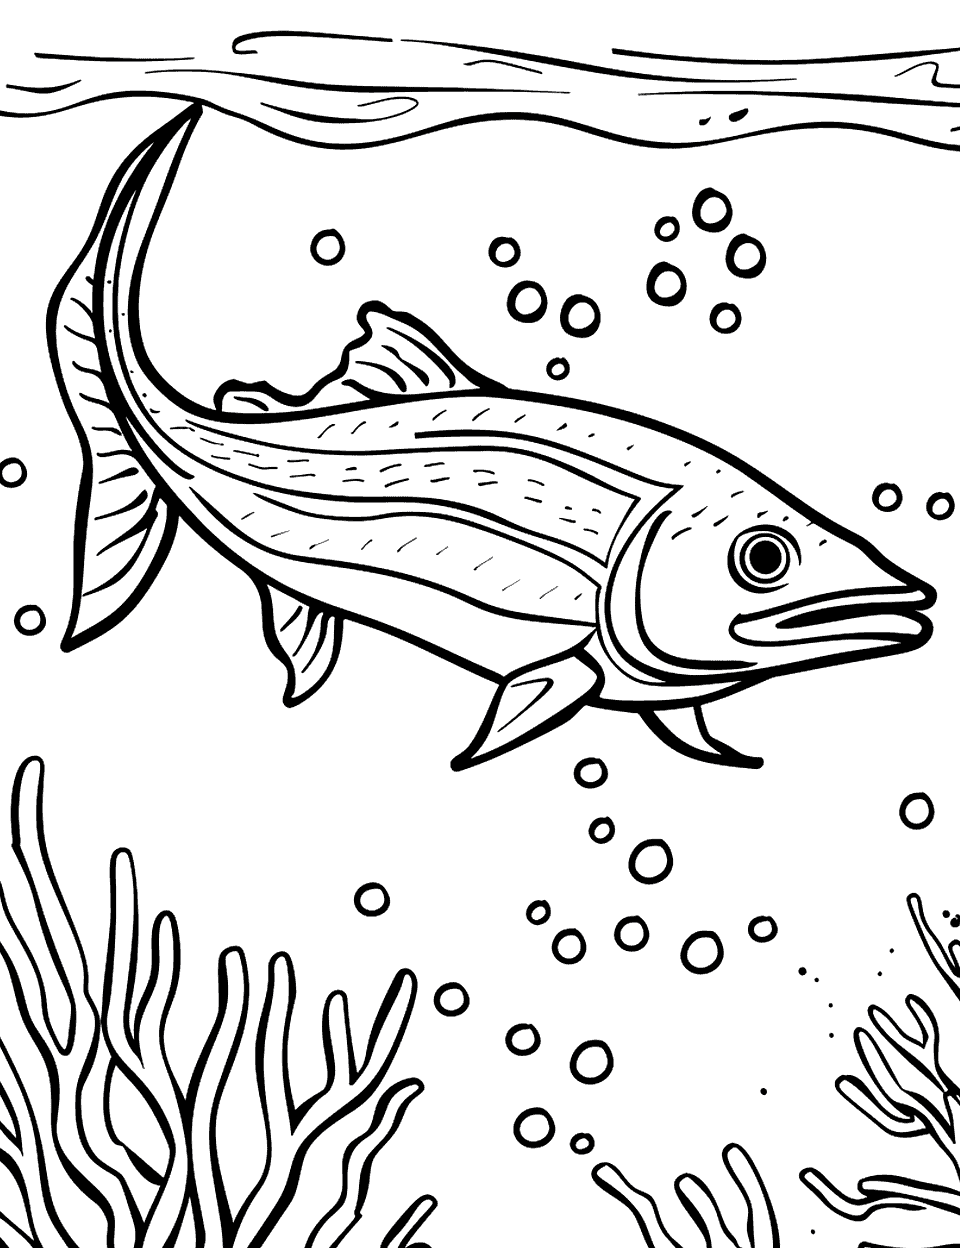 Barracuda Hunting Swiftly Sea Creature Coloring Page - A barracuda speeds through the water in search of prey.